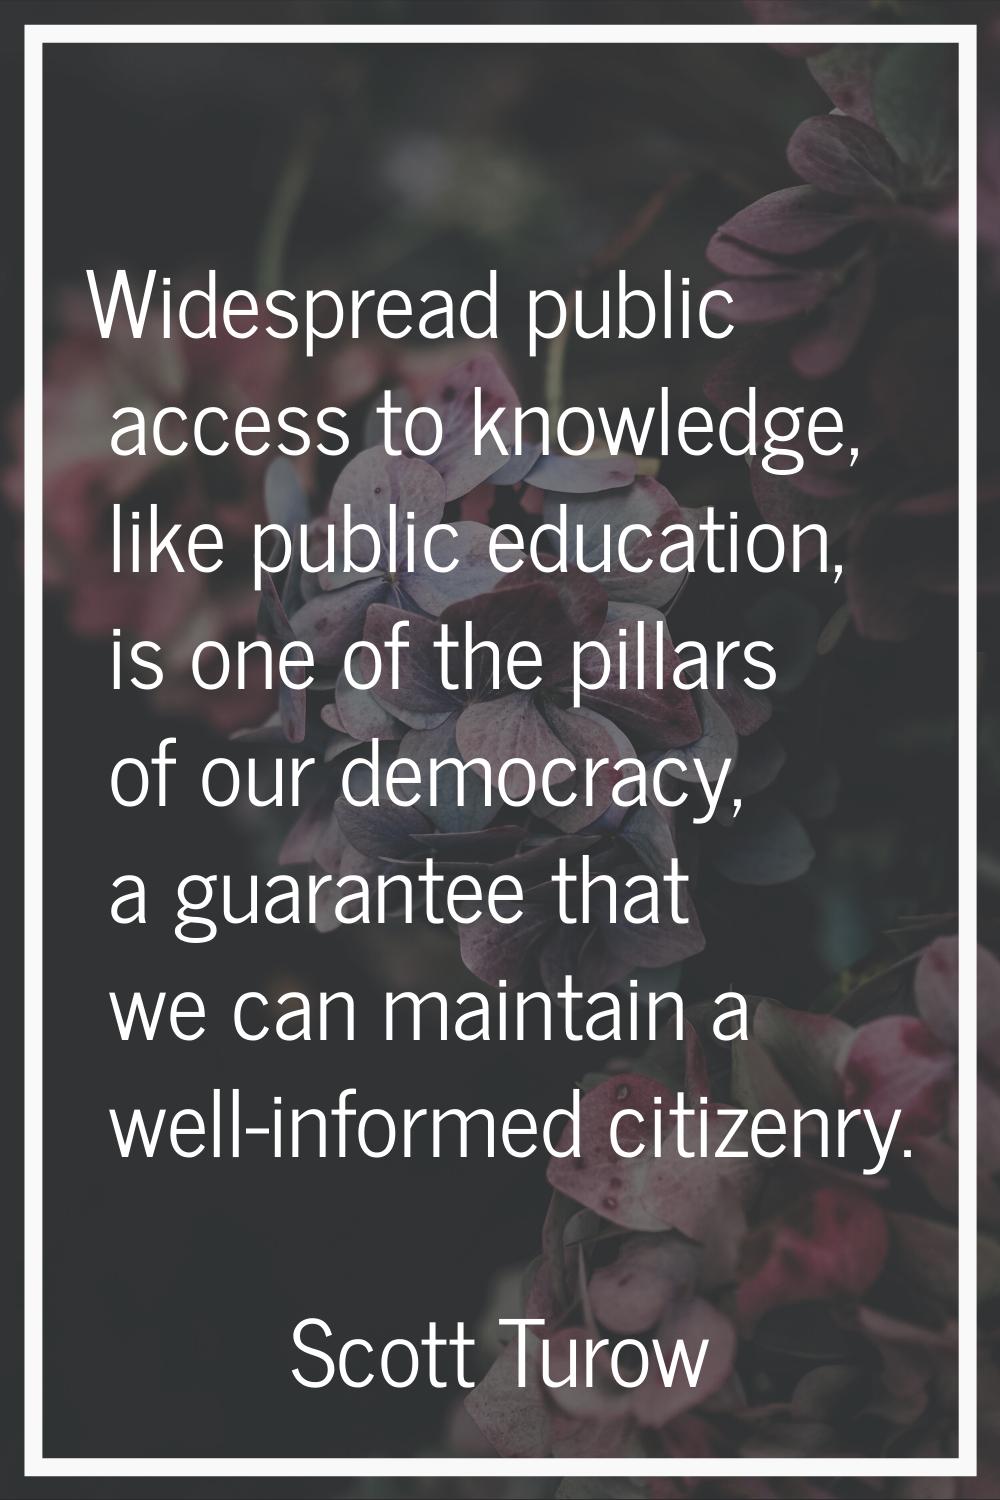 Widespread public access to knowledge, like public education, is one of the pillars of our democrac